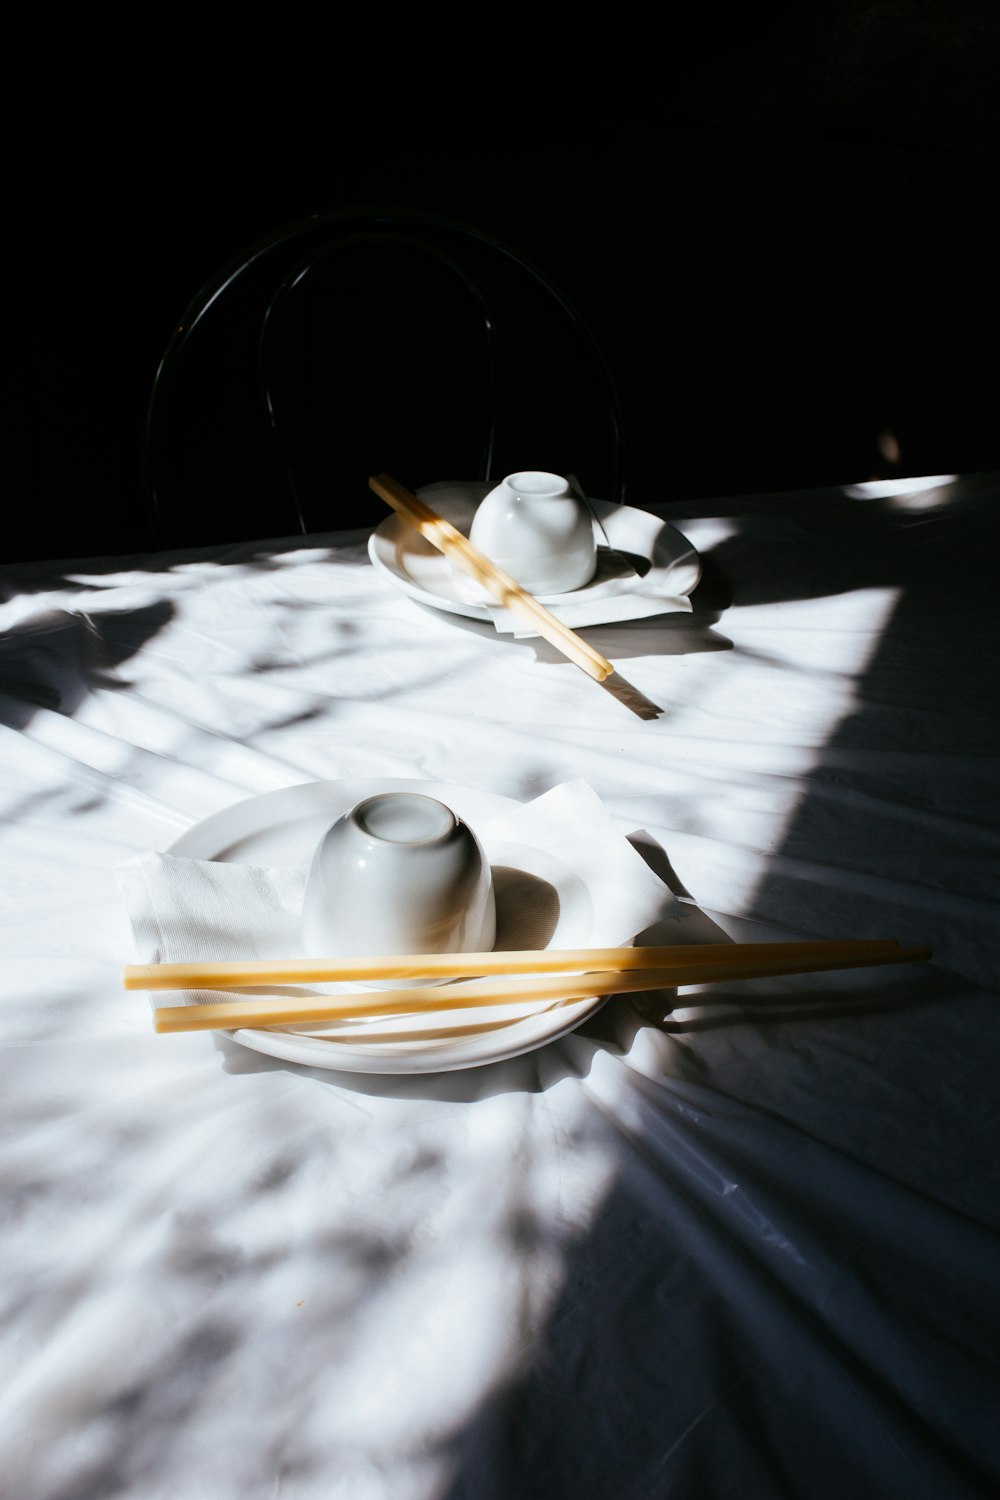 white ceramic teacup and saucer on white tablecloth